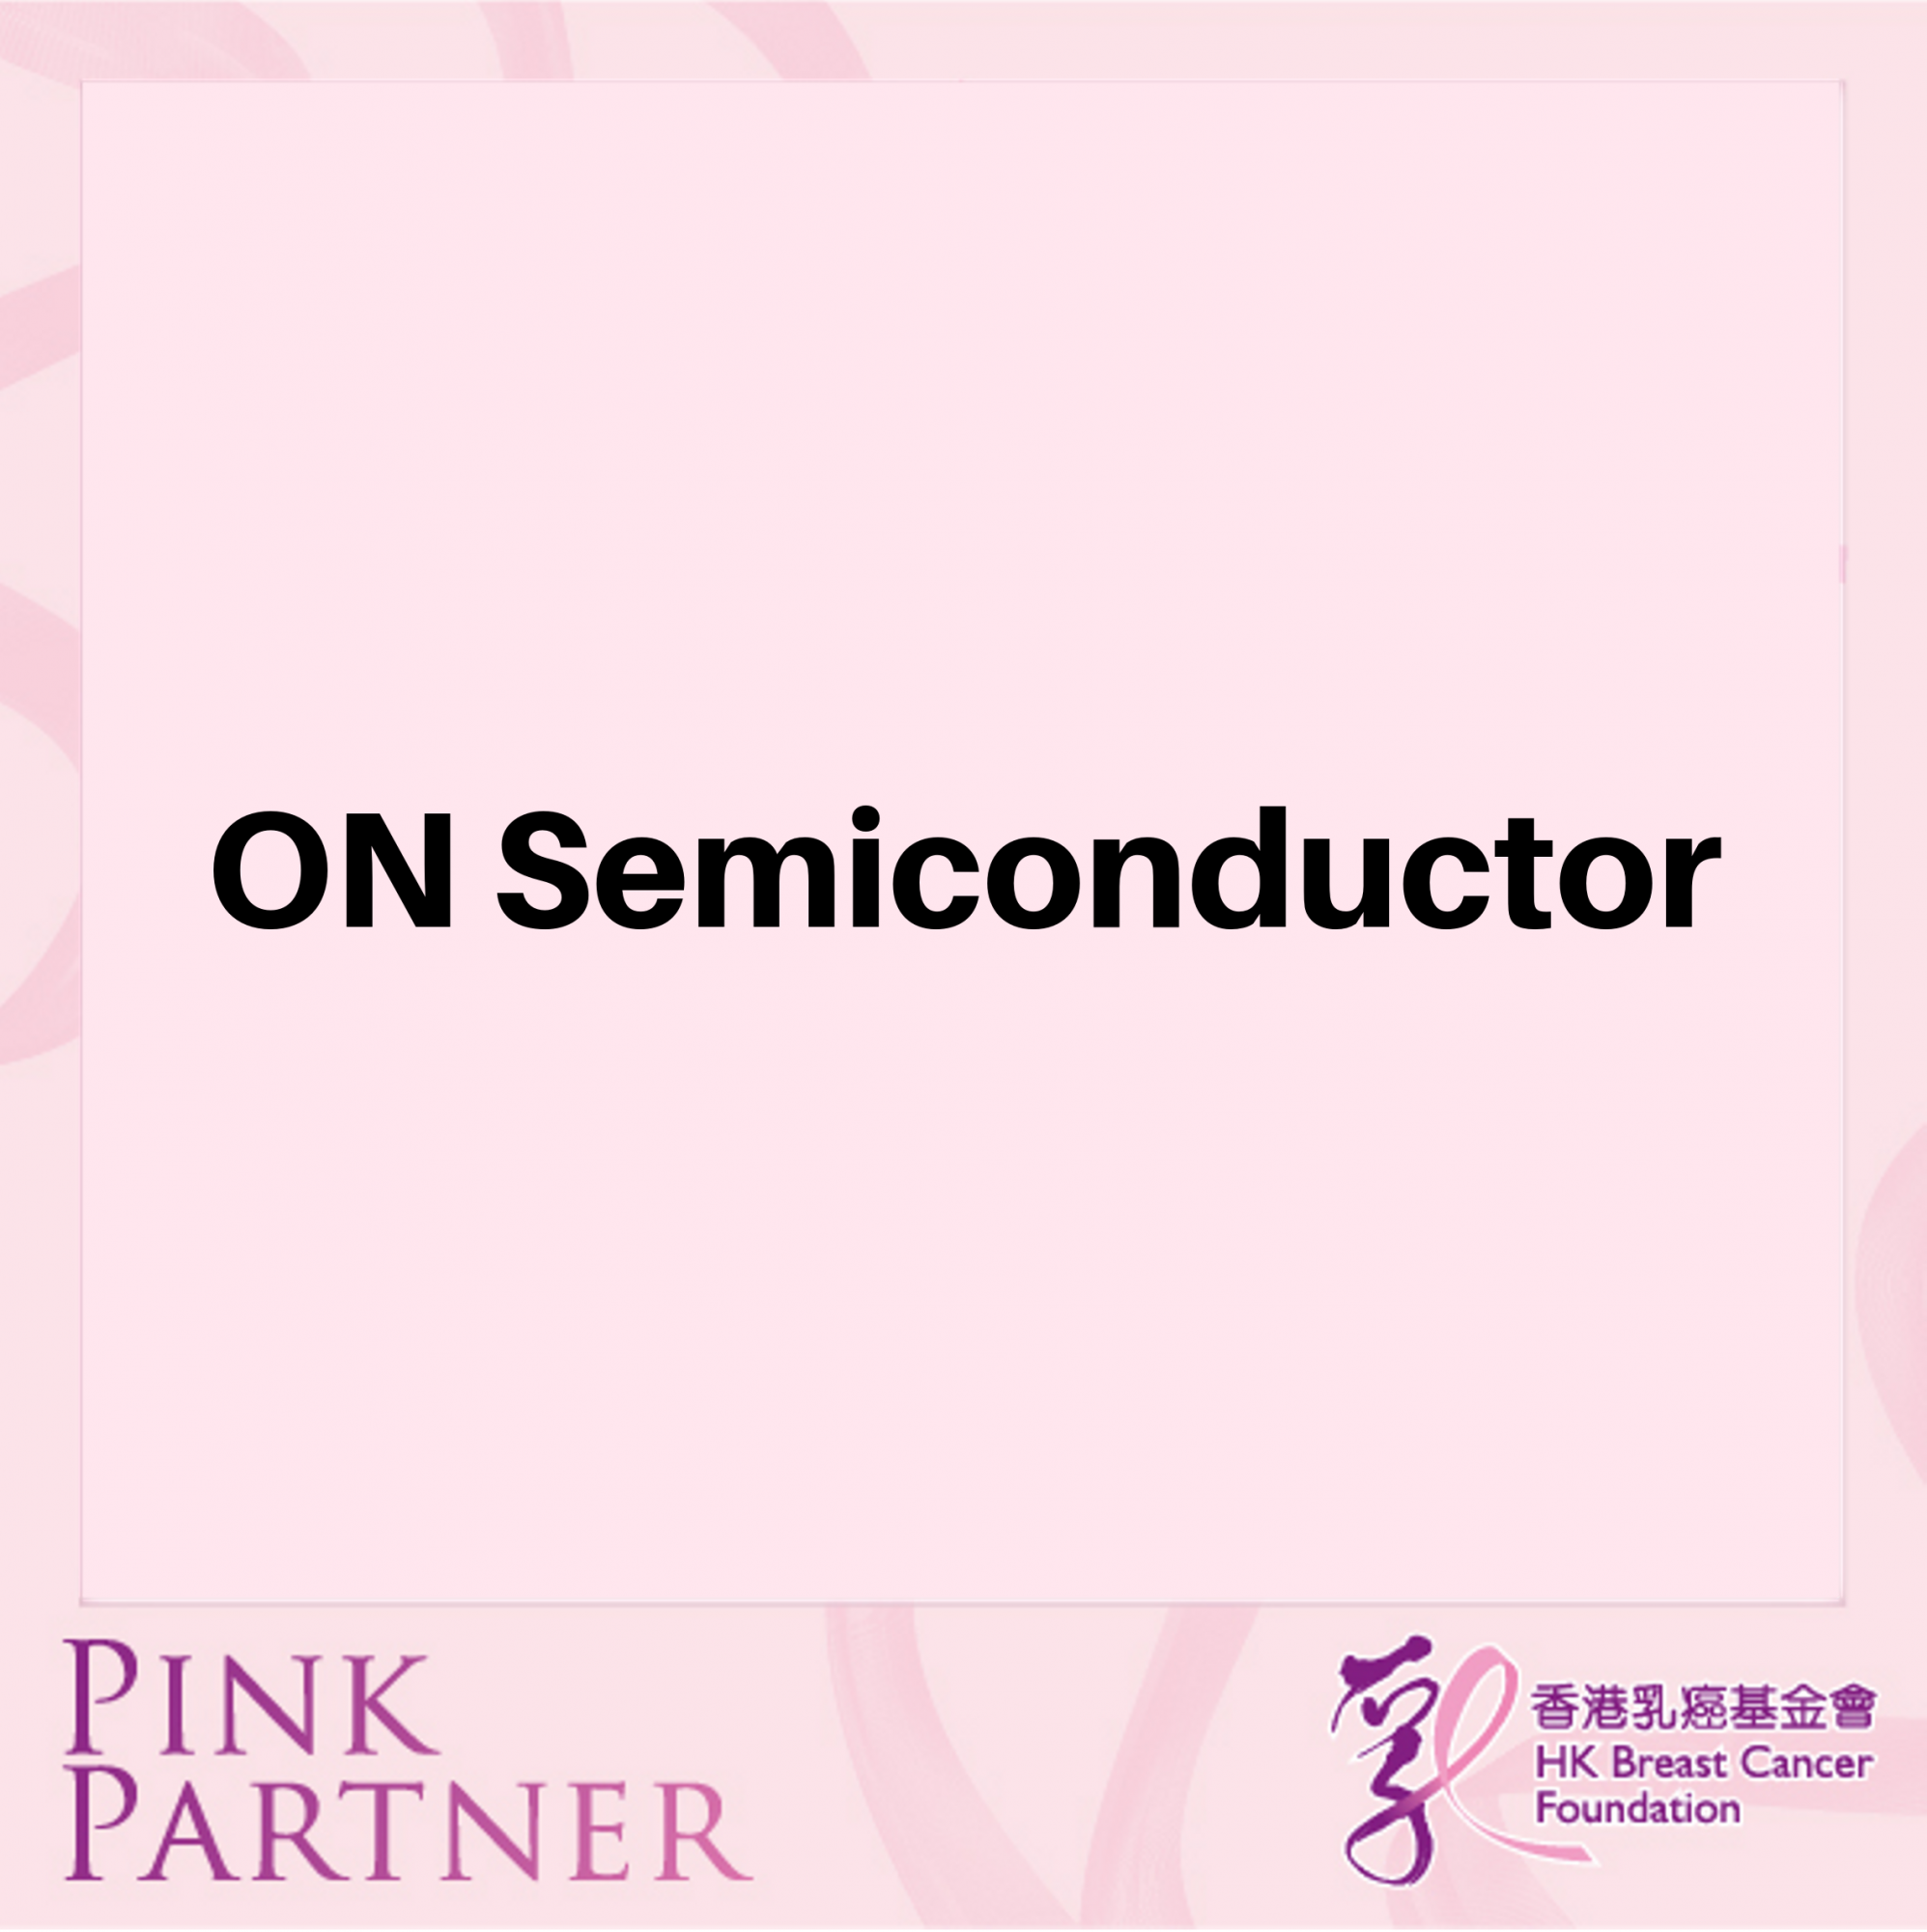 Self Photos / Files - ON Semiconductor PP 2019